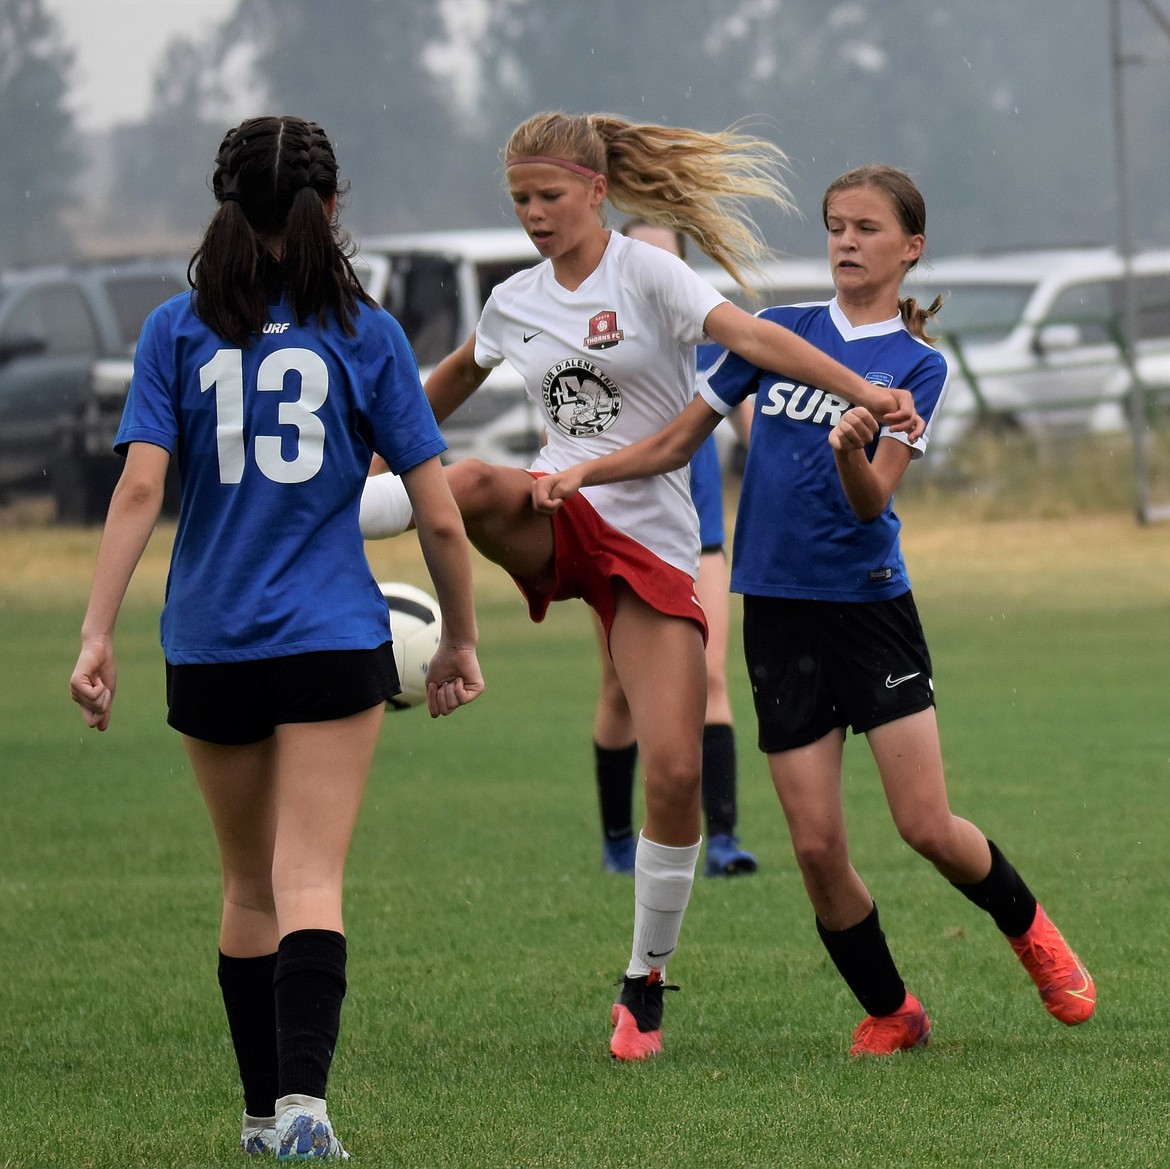 Courtesy photo
Ella Pearson of the Thorns North FC 08 Red plays a ball off of her foot during the team's match in the River City Cup over the weekend in Spokane.